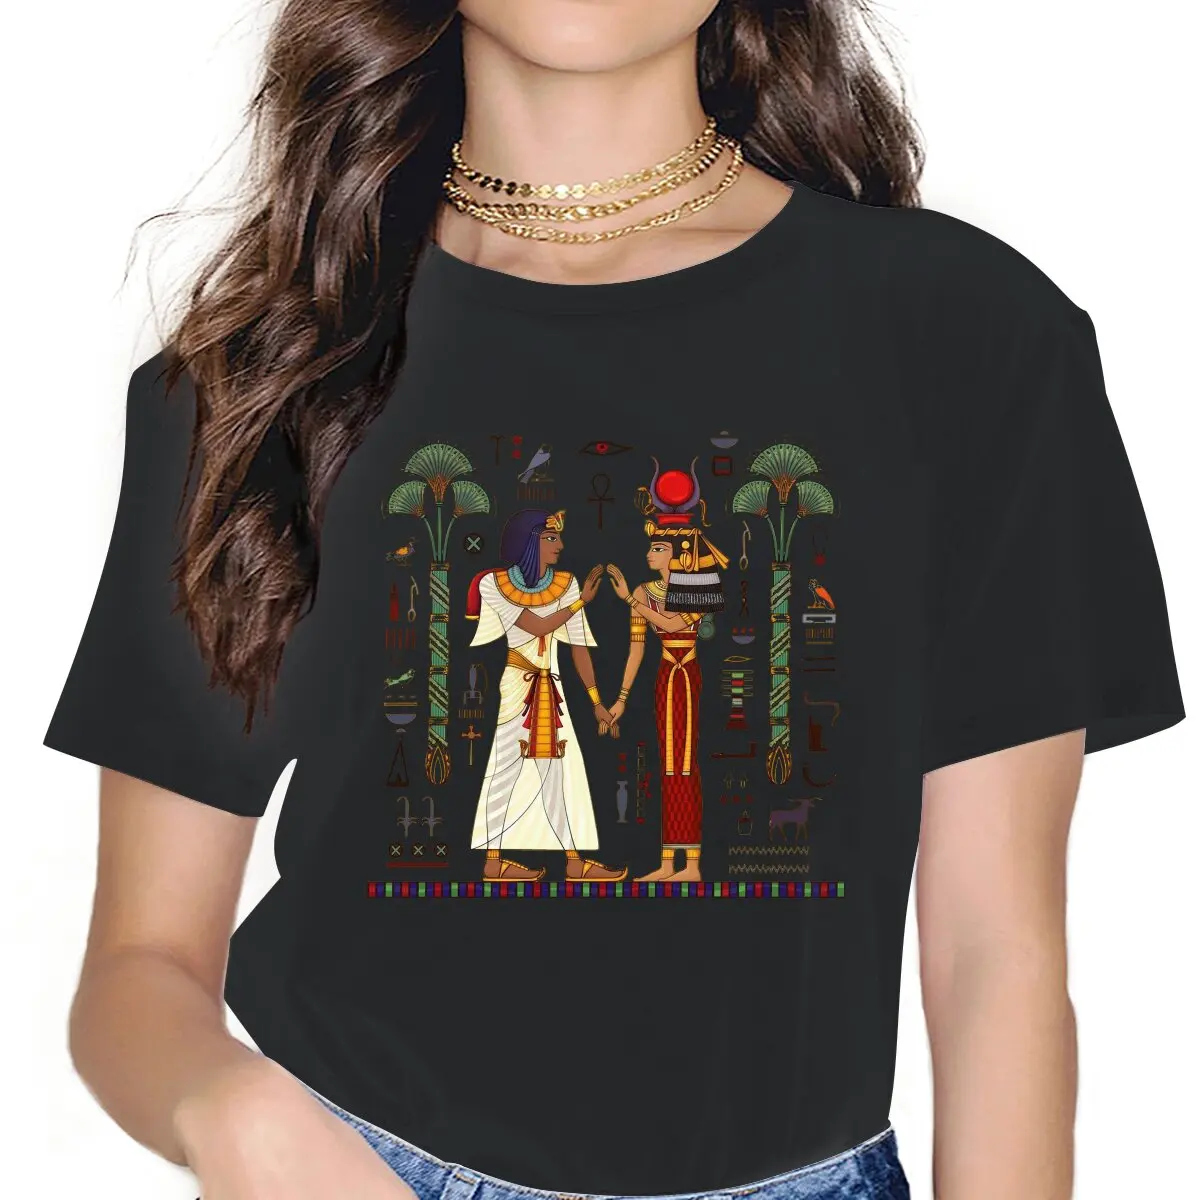 

Hieroglyph And Symbolancient Culture Sing And Symbo Women Tshirts Magic Egyptian Ancient Egypt Culture Gothic Female Clothing